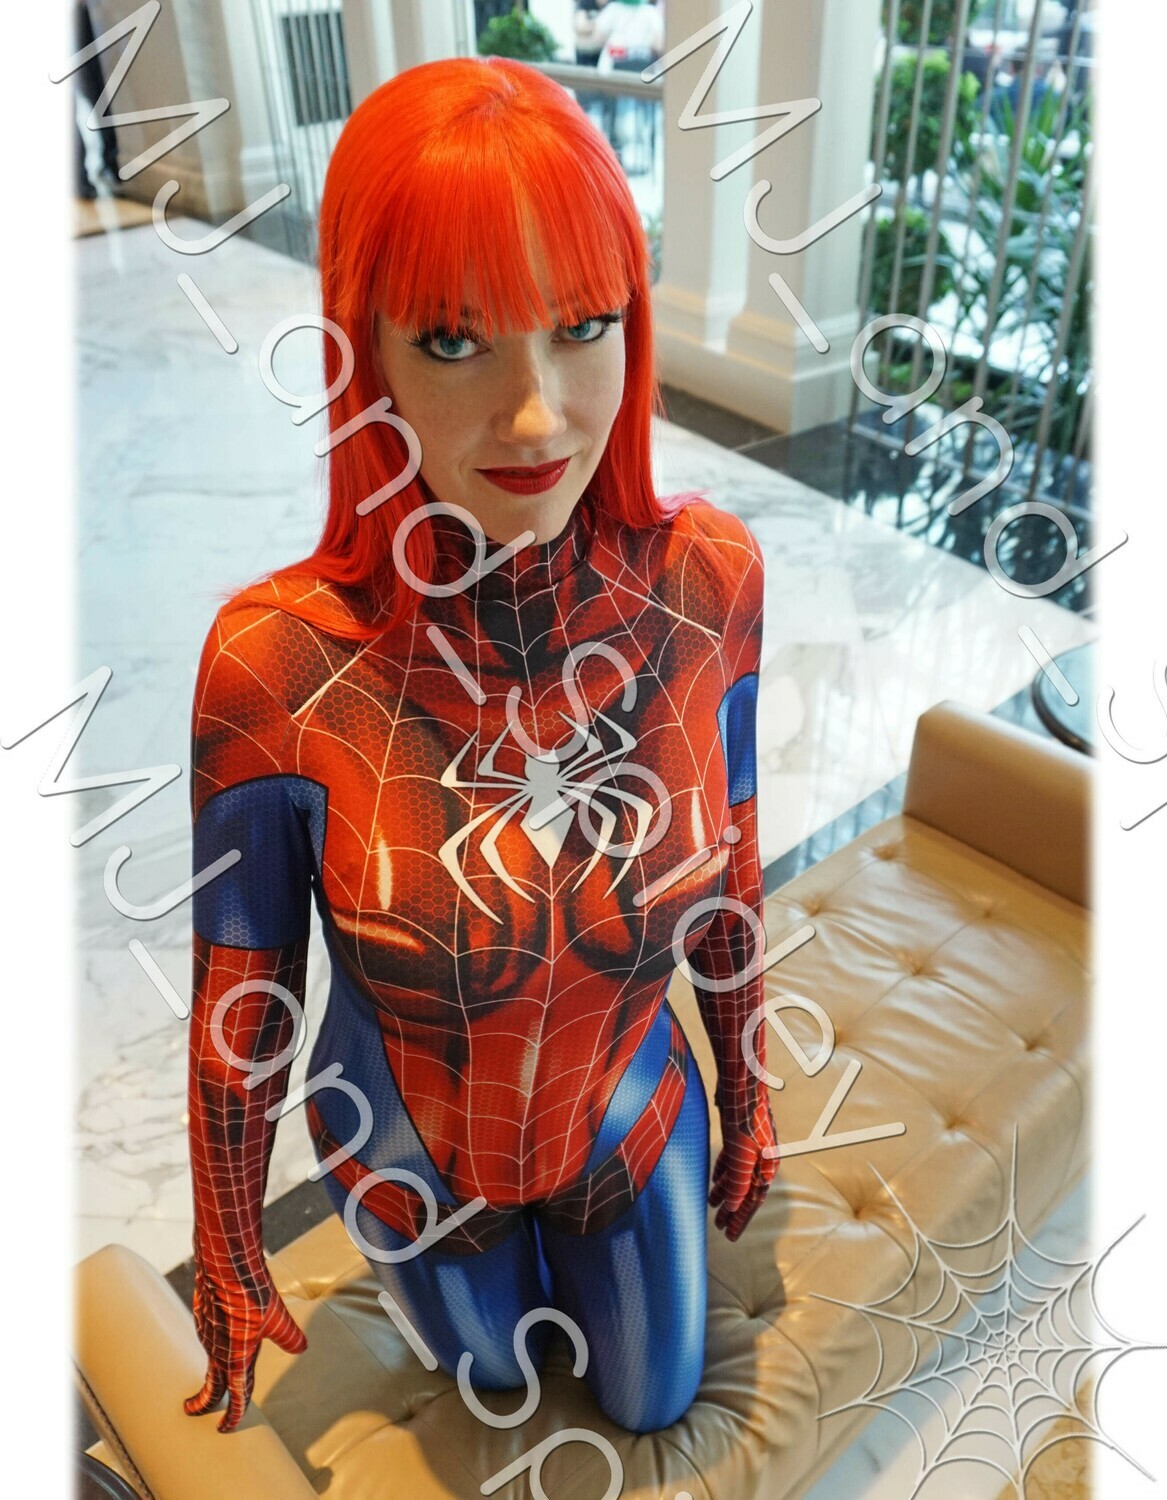 Marvel - Spider-Man - Mary Jane Watson - Classic Spider-Suit - MAGFest 1 - 8.5x11 Cosplay Print (@MJ_and_Spidey, MJ and Spidey, Comics)